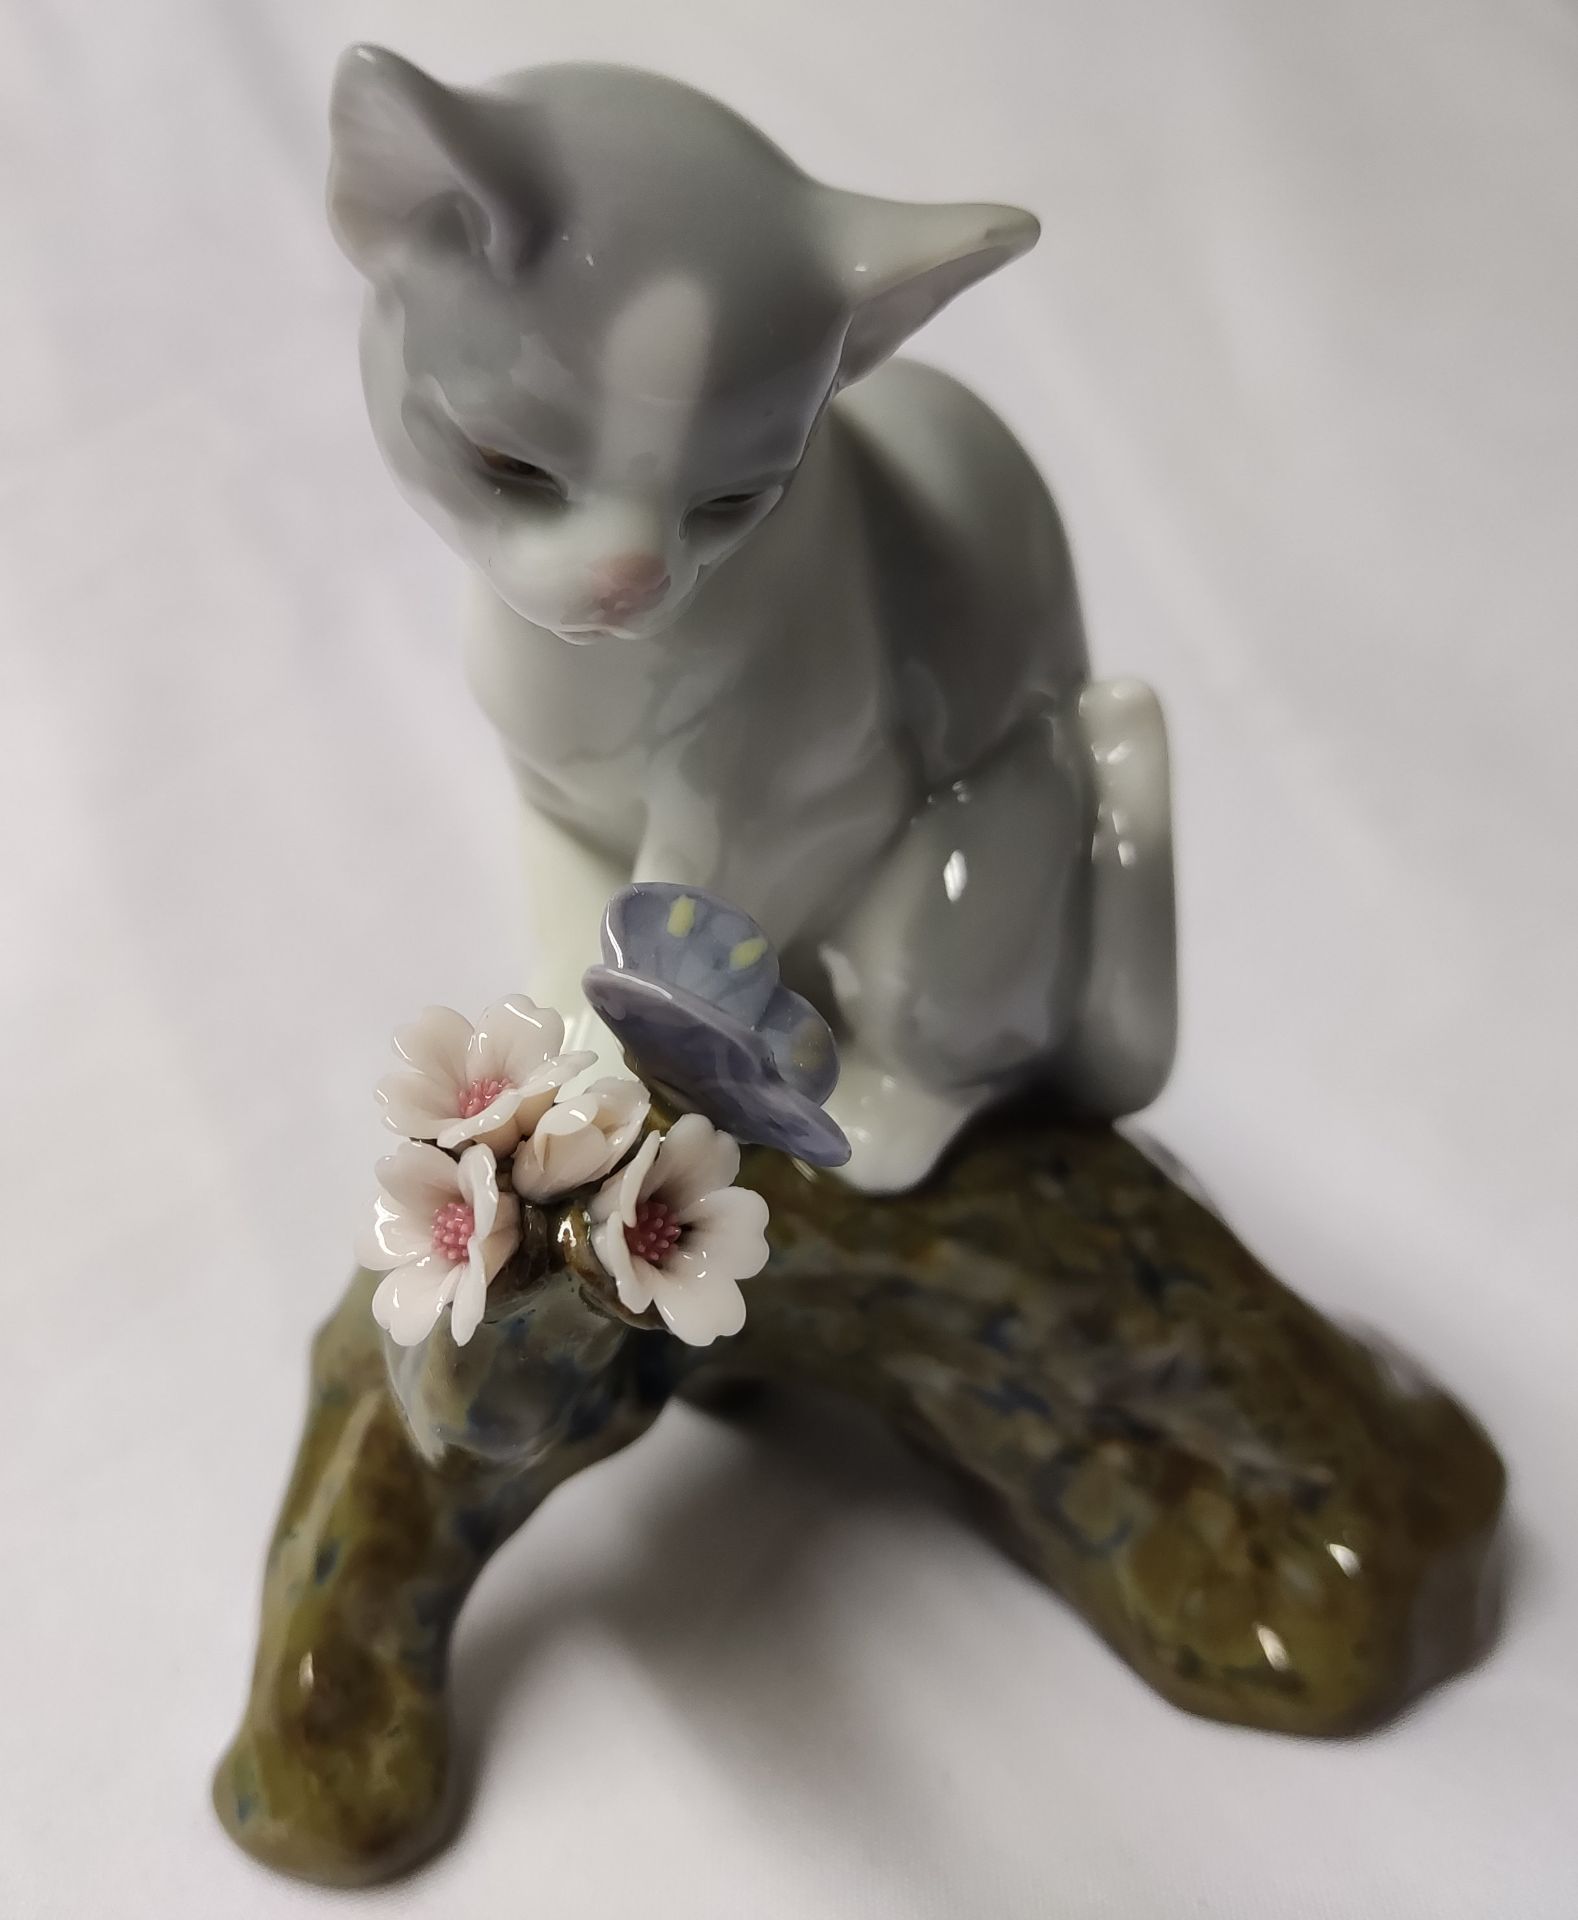 1 x LLADRO Blossoms For The Kitten Cat Porcelain Figurine - New/Boxed - RRP £270 - Ref: /HOC243/ - Image 7 of 21